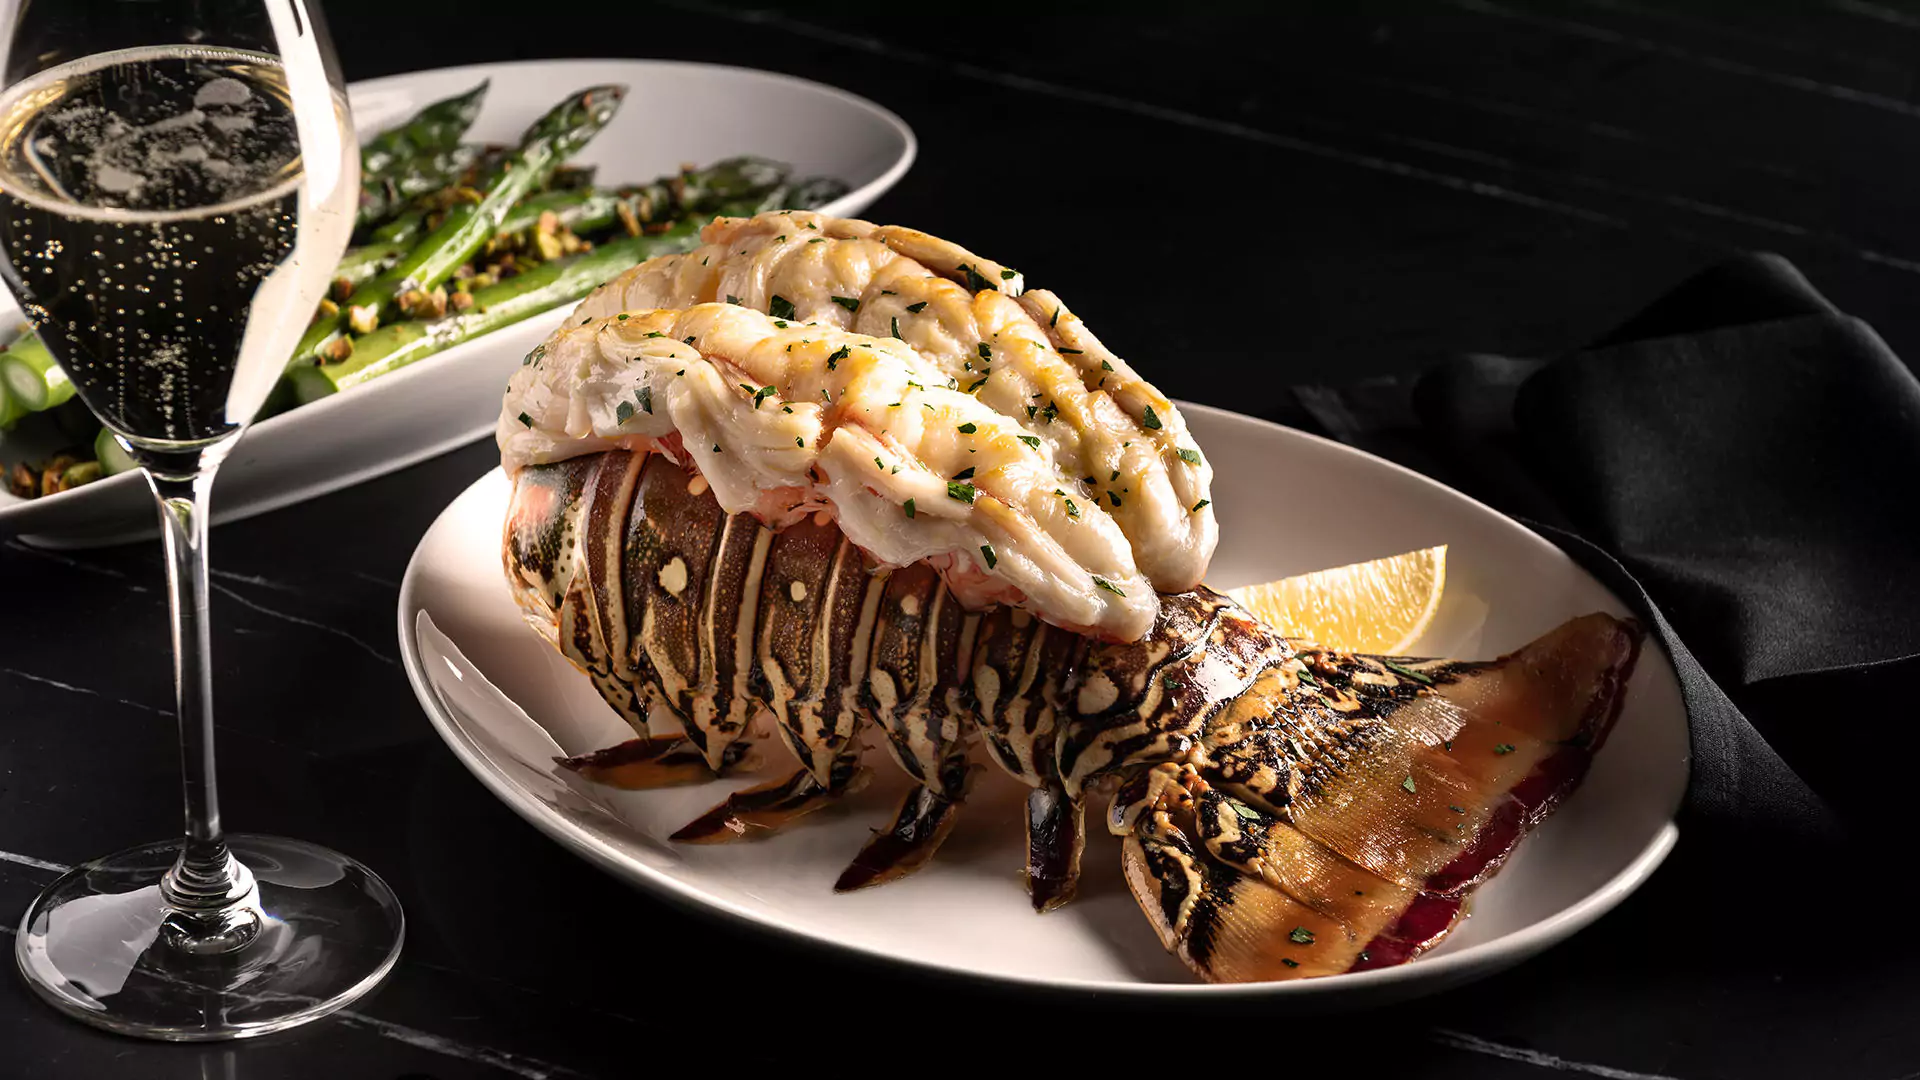 Decadent Lobster Tail with a Glass of Wine at DelFrisco’s